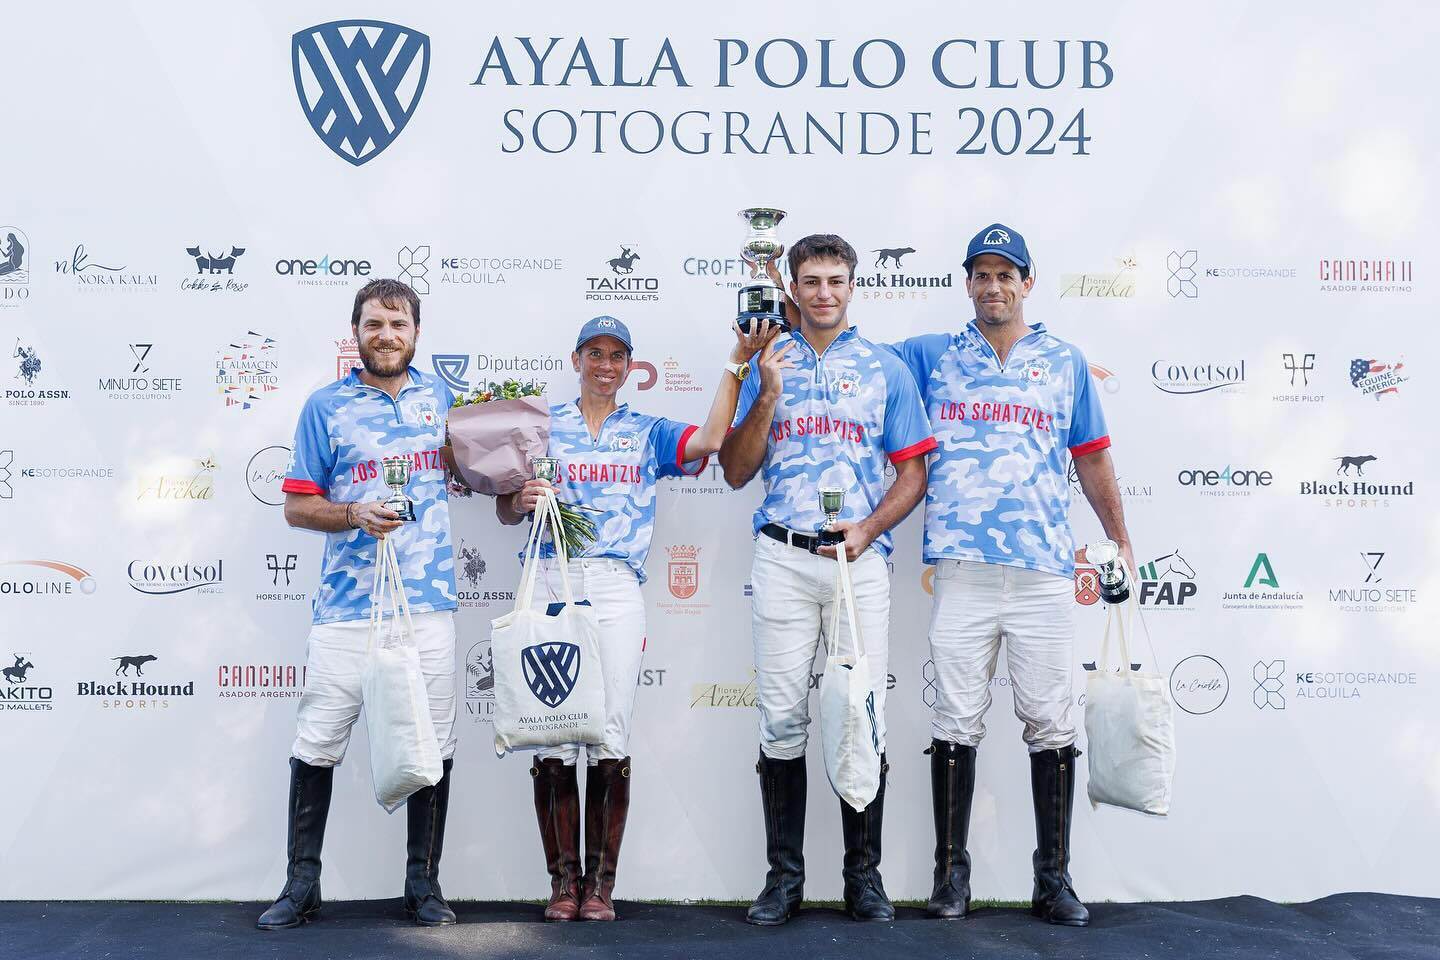 Winners of the Welcome Cup, Los Schatzies | Photo credit: matcallejo